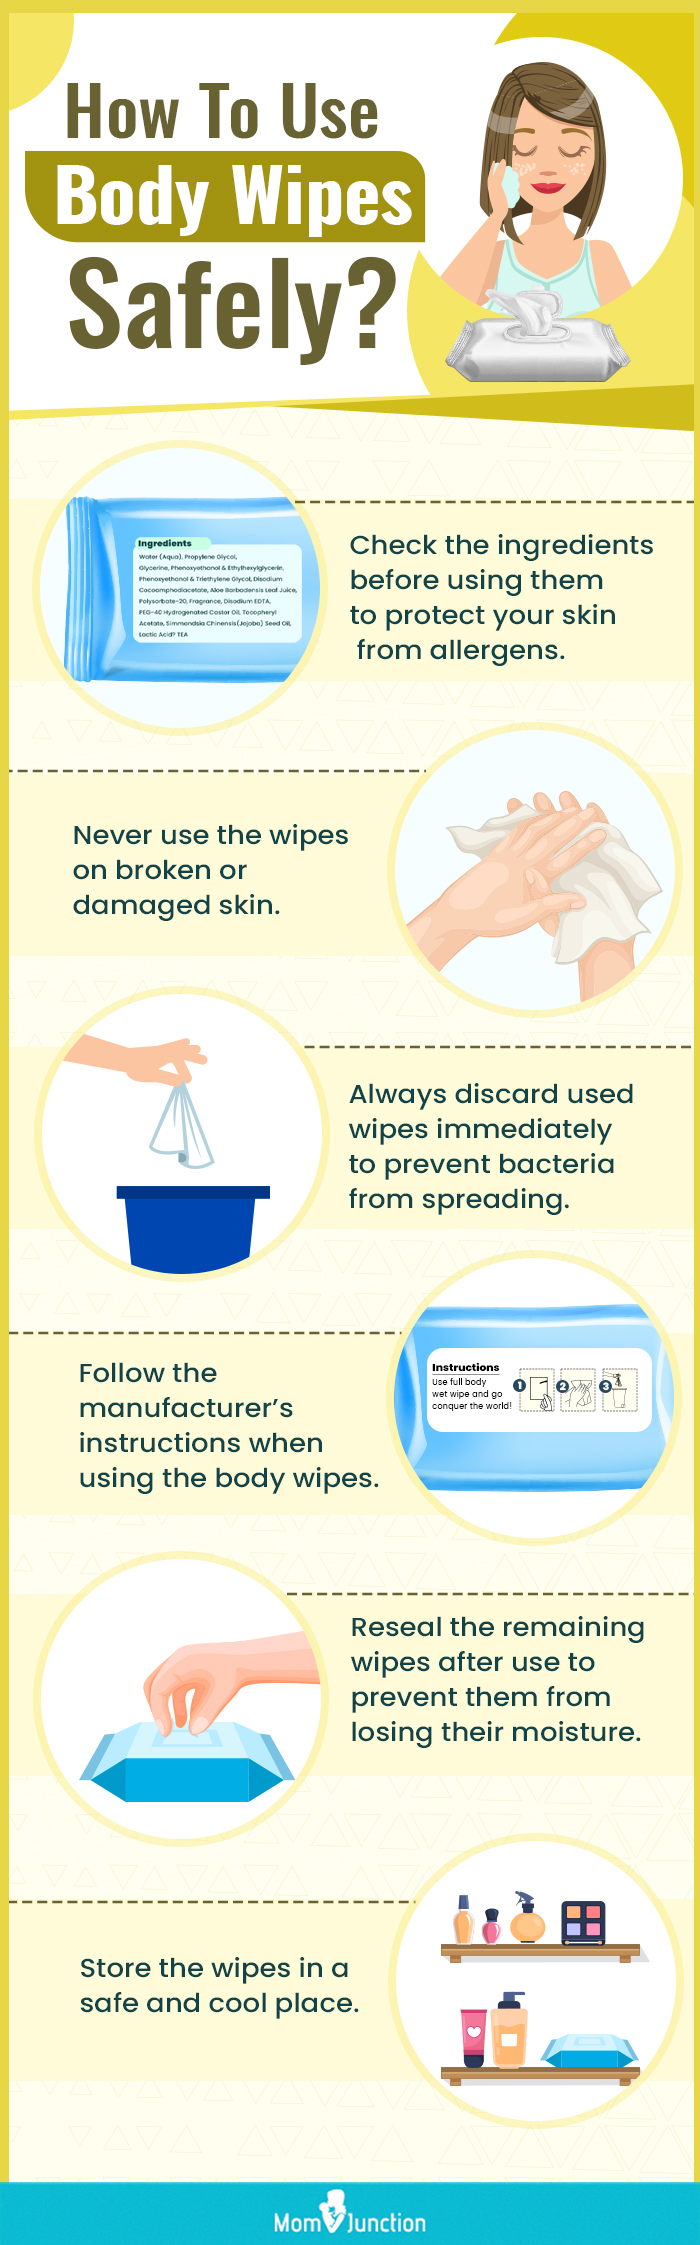 How To Use Body Wipes Safely (infographic)